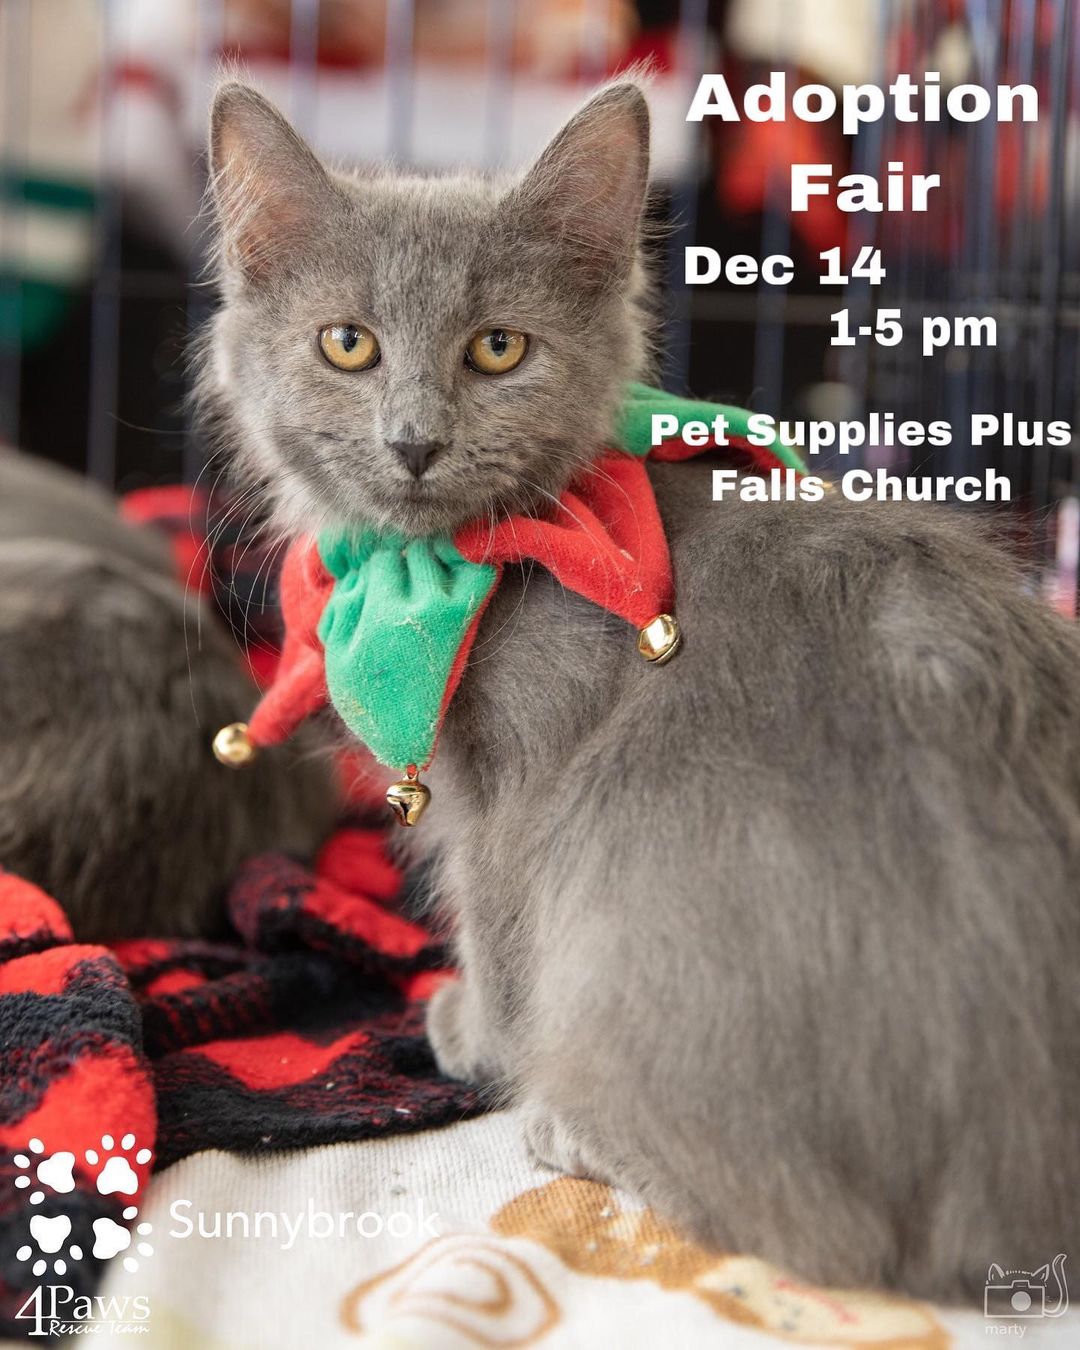 ☃️CAT ADOPTION FAIR☃️ Saturday, December 14 from 1-5pm at Pet Supplies Plus Falls Church (7502 Leesburg Pike). Last adoption fair of the year, so come on out and meet some festive kitties! <a target='_blank' href='https://www.instagram.com/explore/tags/adoptdontshop/'>#adoptdontshop</a> <a target='_blank' href='https://www.instagram.com/explore/tags/cat/'>#cat</a> <a target='_blank' href='https://www.instagram.com/explore/tags/cats/'>#cats</a> <a target='_blank' href='https://www.instagram.com/explore/tags/catsofinstagram/'>#catsofinstagram</a> <a target='_blank' href='https://www.instagram.com/explore/tags/caturday/'>#caturday</a> <a target='_blank' href='https://www.instagram.com/explore/tags/kittens/'>#kittens</a> <a target='_blank' href='https://www.instagram.com/explore/tags/adoptdontshop/'>#adoptdontshop</a>🐾 <a target='_blank' href='https://www.instagram.com/explore/tags/fallschurchva/'>#fallschurchva</a> <a target='_blank' href='https://www.instagram.com/explore/tags/petsuppliesplus/'>#petsuppliesplus</a>